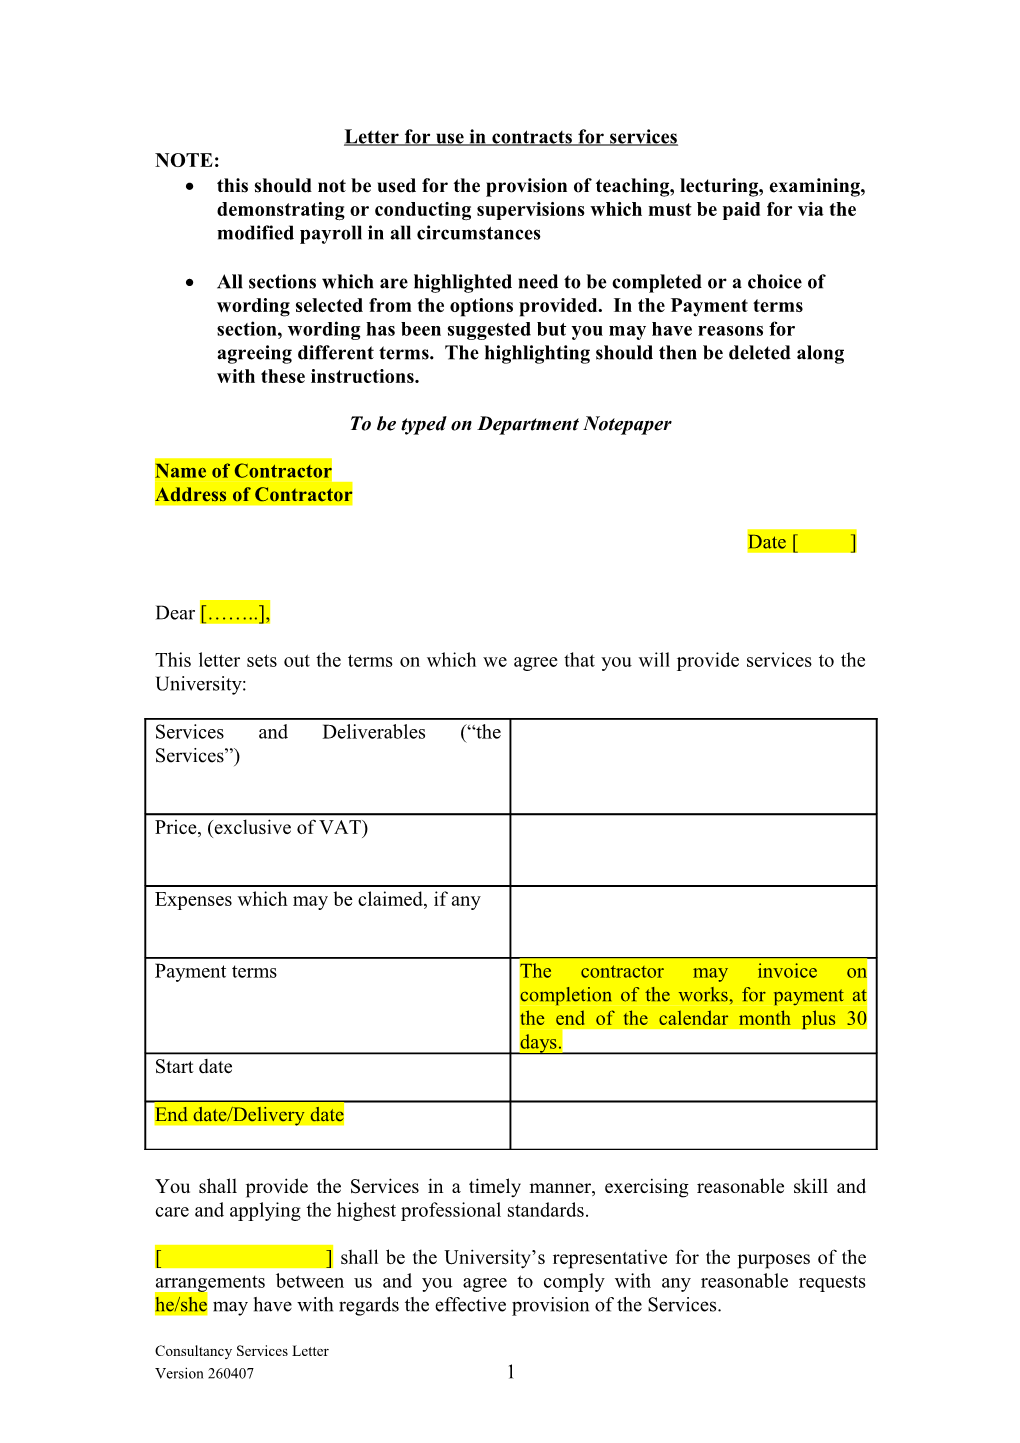 Letter for Use in Contracts for Services for Less Than Pounds 300